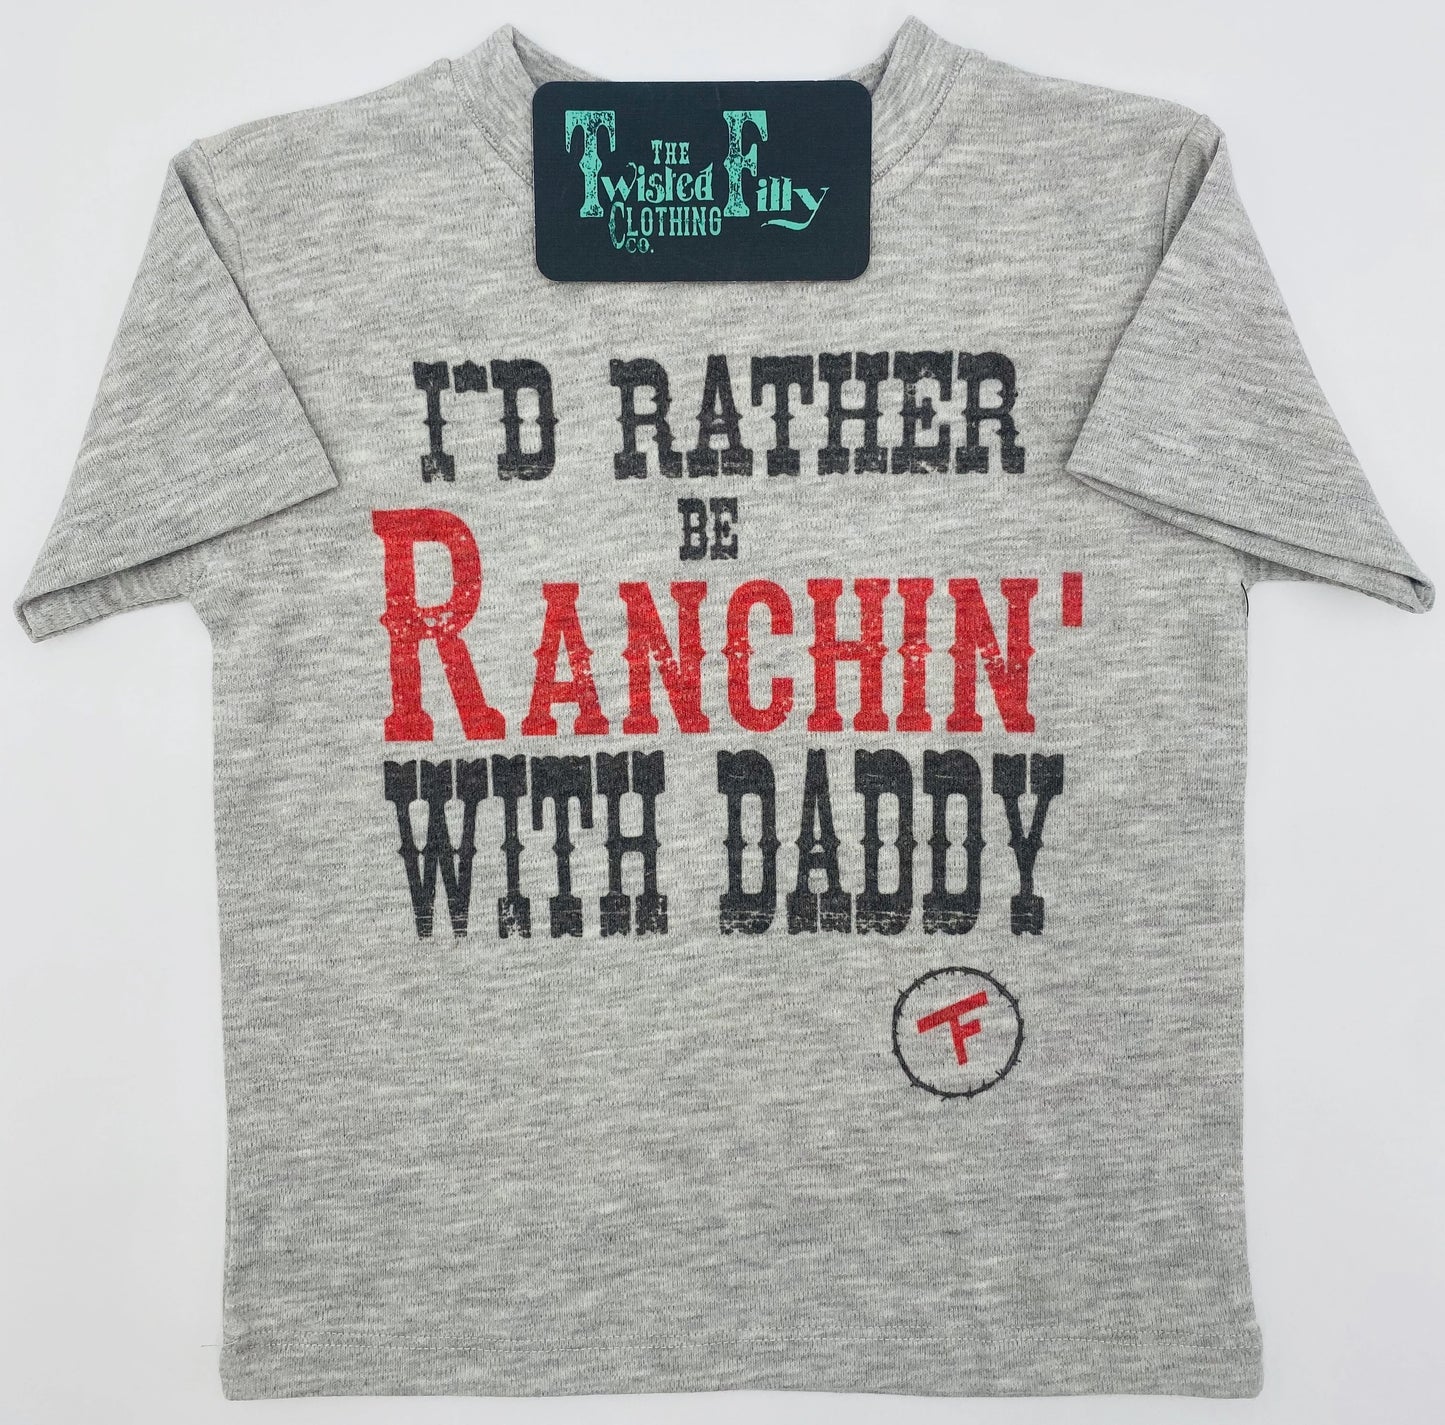 THE TWISTED FILLY CLOTHING CO. I'd Rather Be Ranchin' with Daddy - S/S Infant Tee - Grey